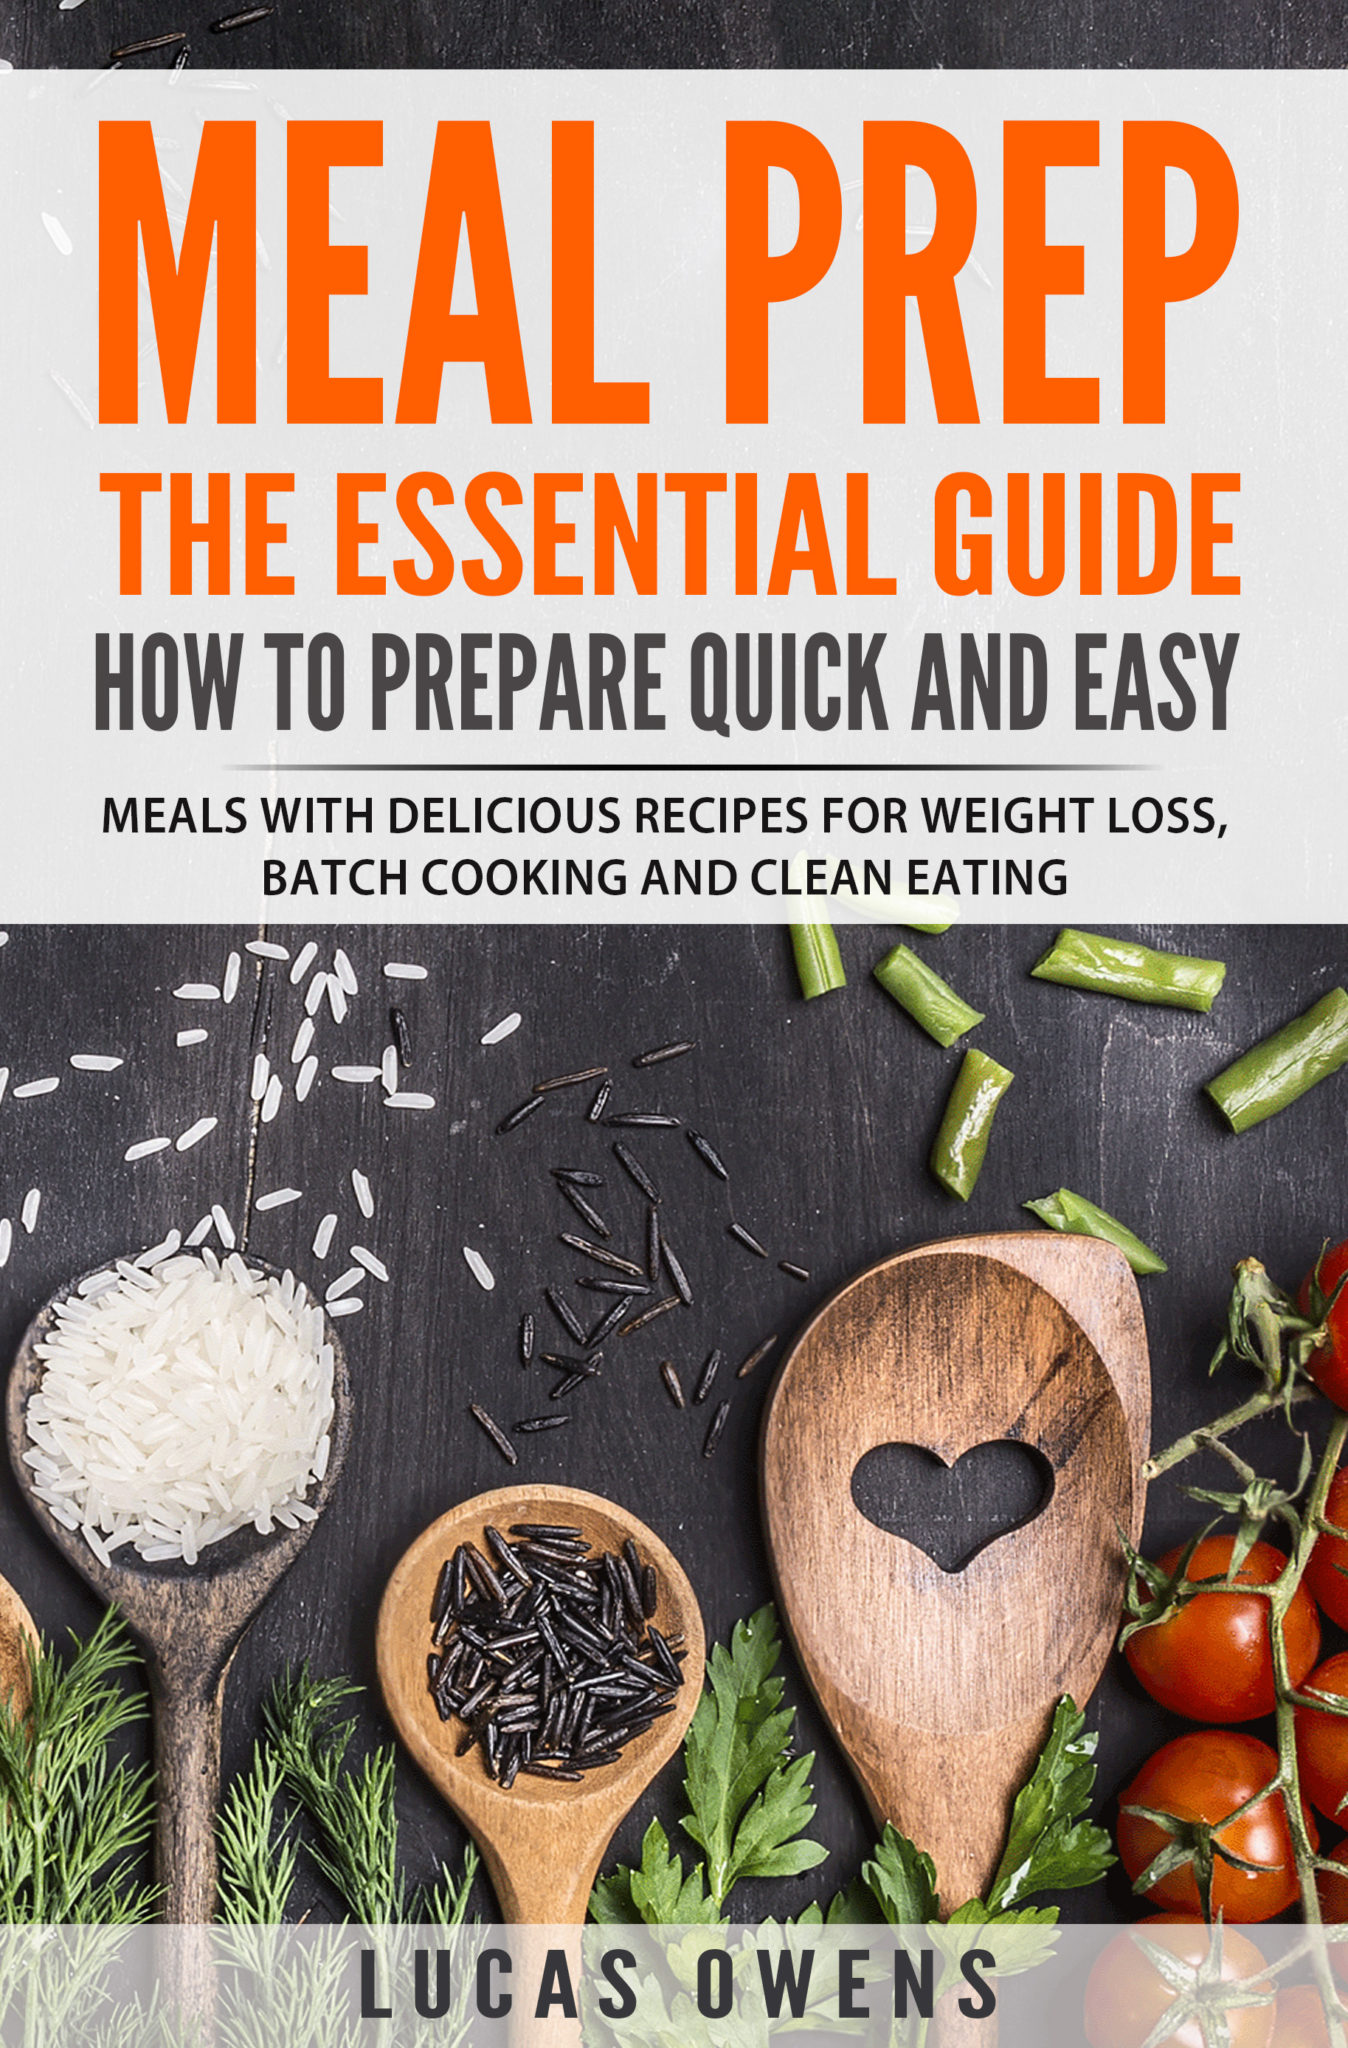 FREE: Meal Prep: The Essential Guide: How to Prepare Quick and Easy Meals with Delicious Recipes for Weight Loss, Batch Cooking, and Clean Eating by Lucas Owens